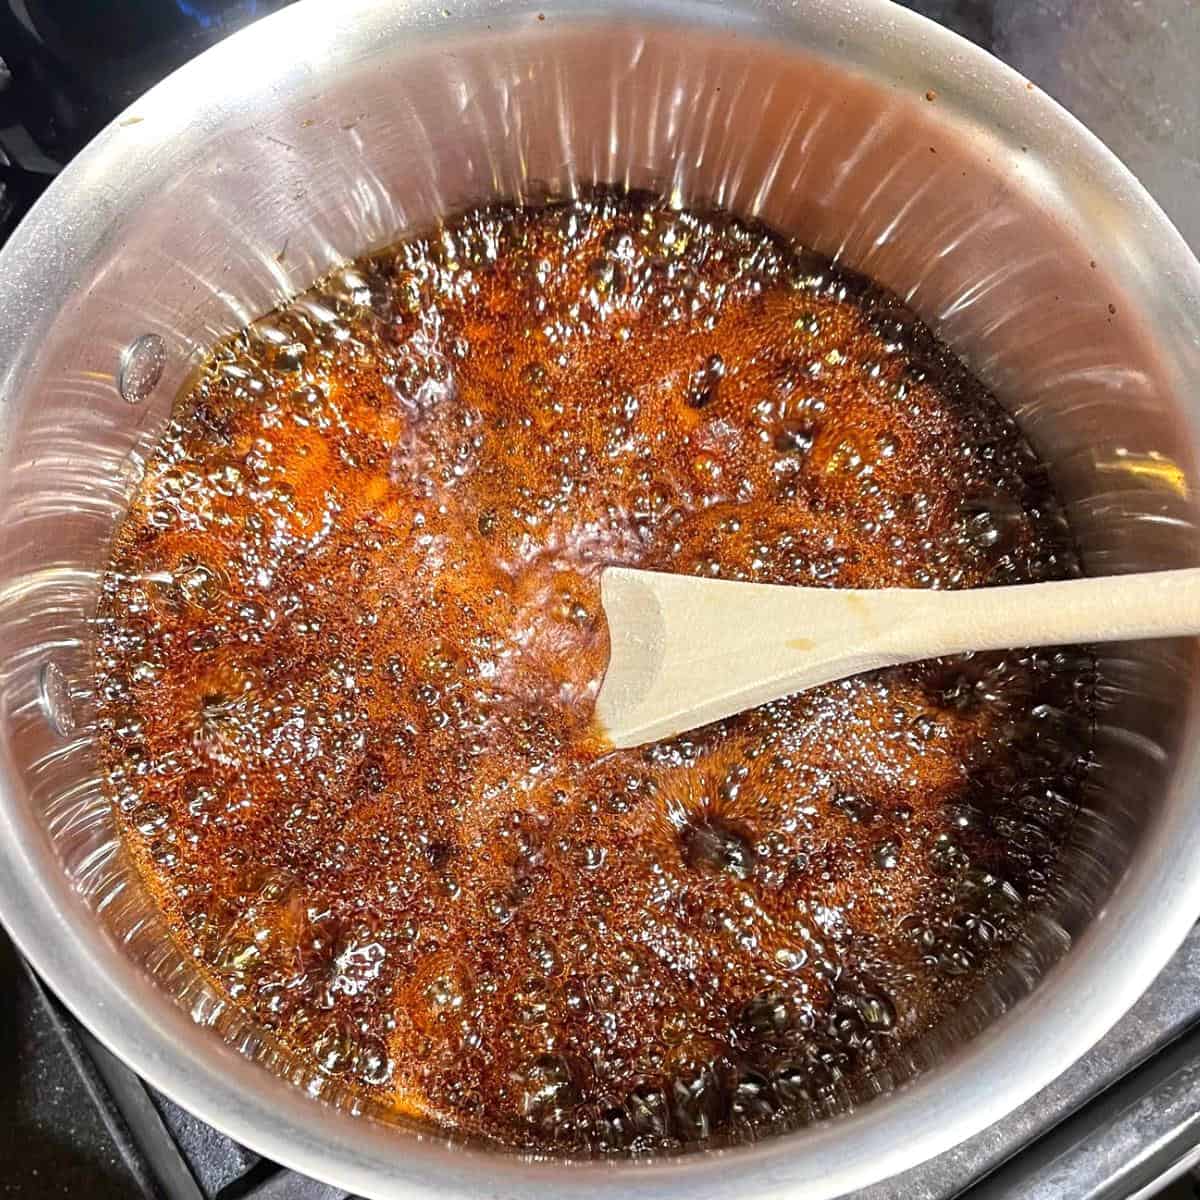 Jaggery boiling in saucepan with ladle.